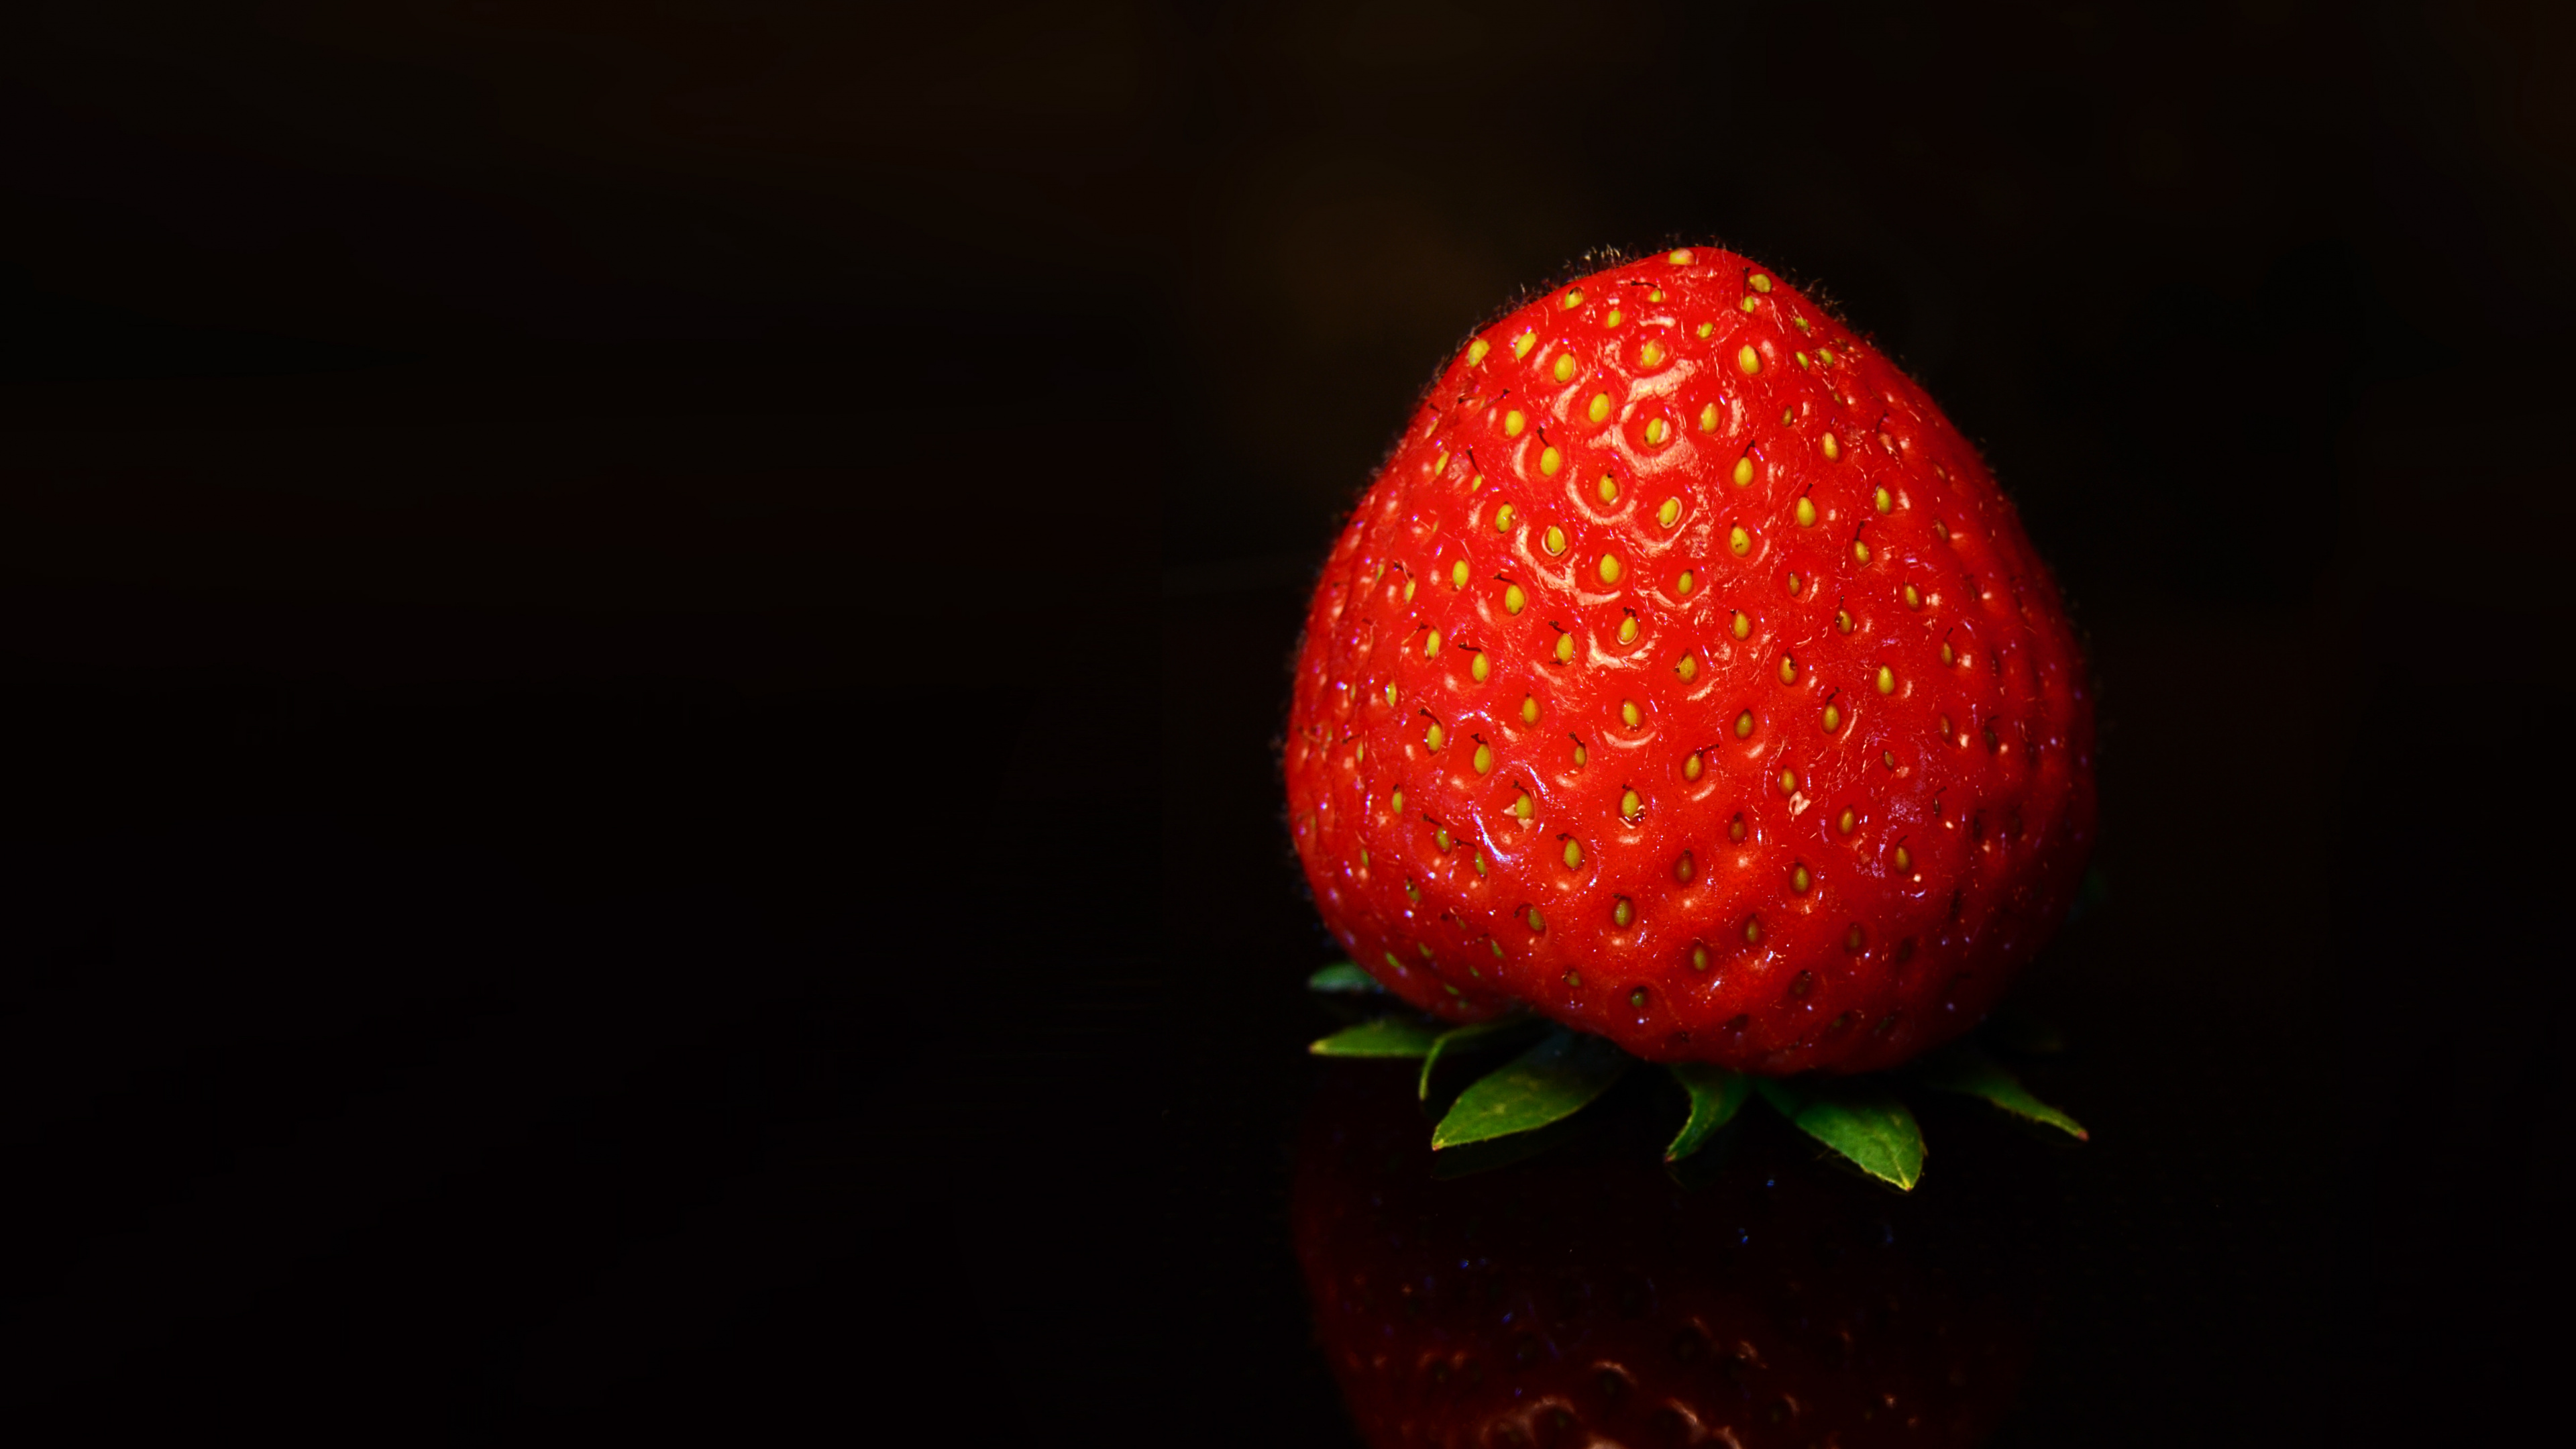 Red Strawberry Fruit in Close up Photography. Wallpaper in 3840x2160 Resolution